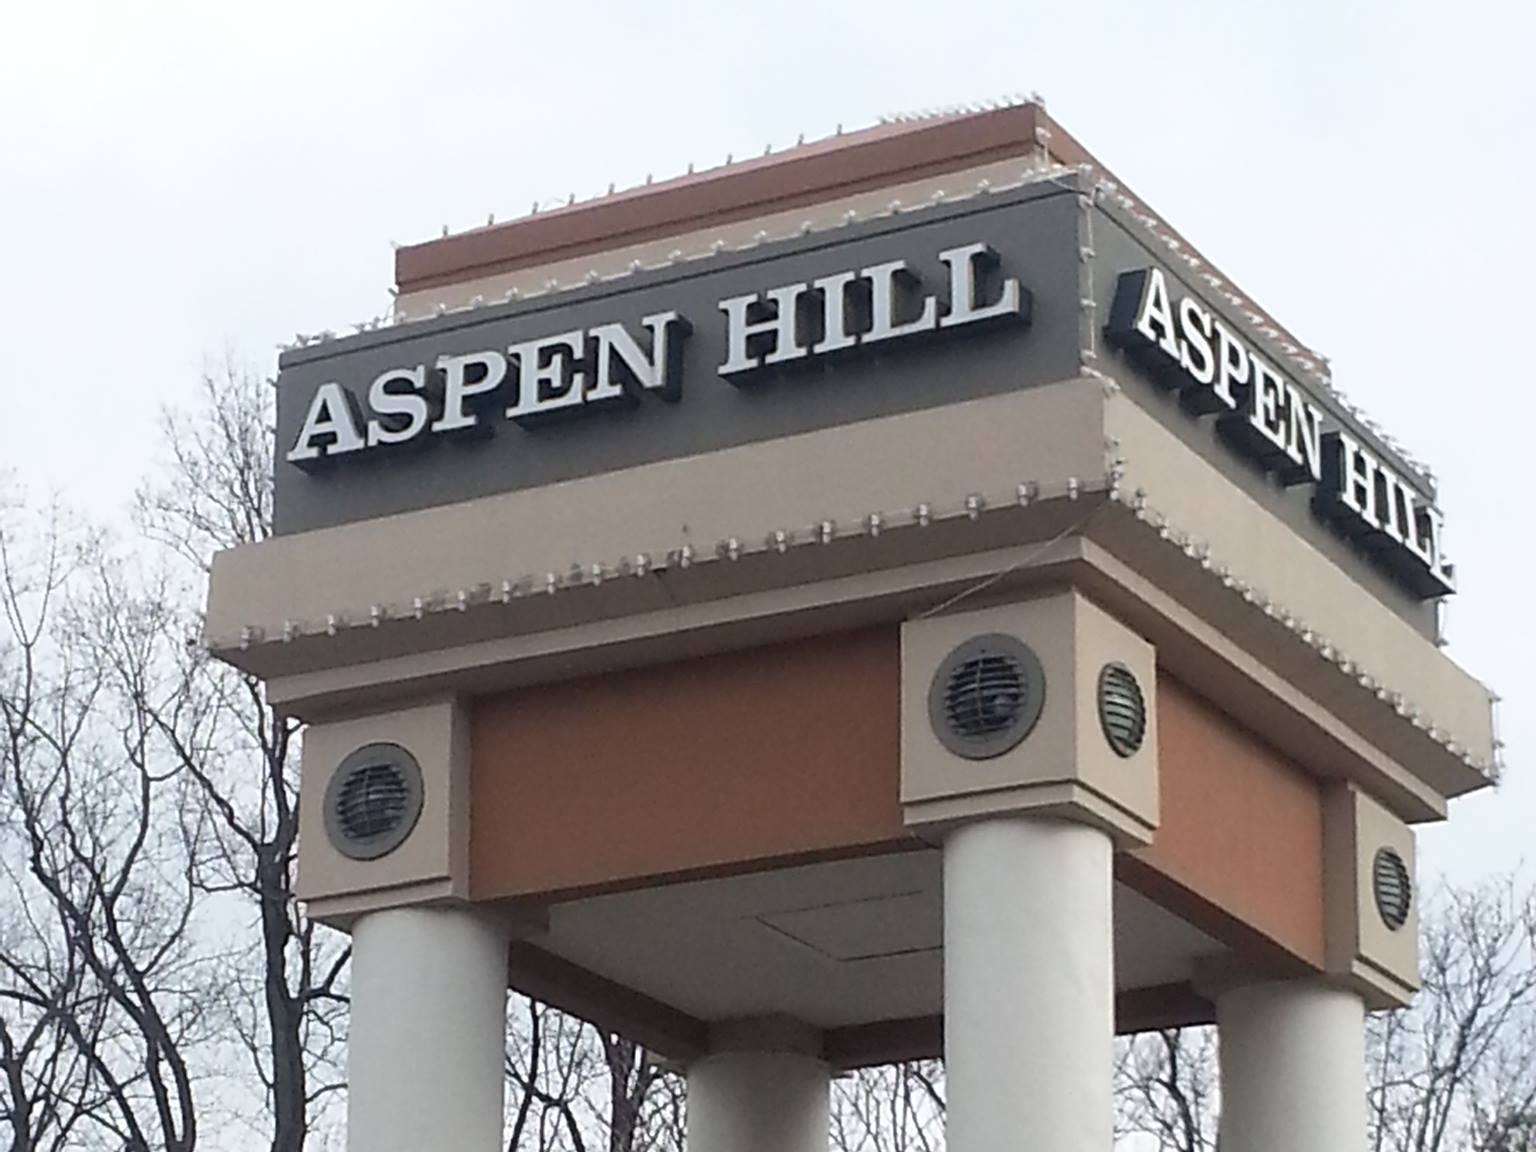 Aspen Hill Restaurants Open for Take Out, Pick Up, and Delivery During